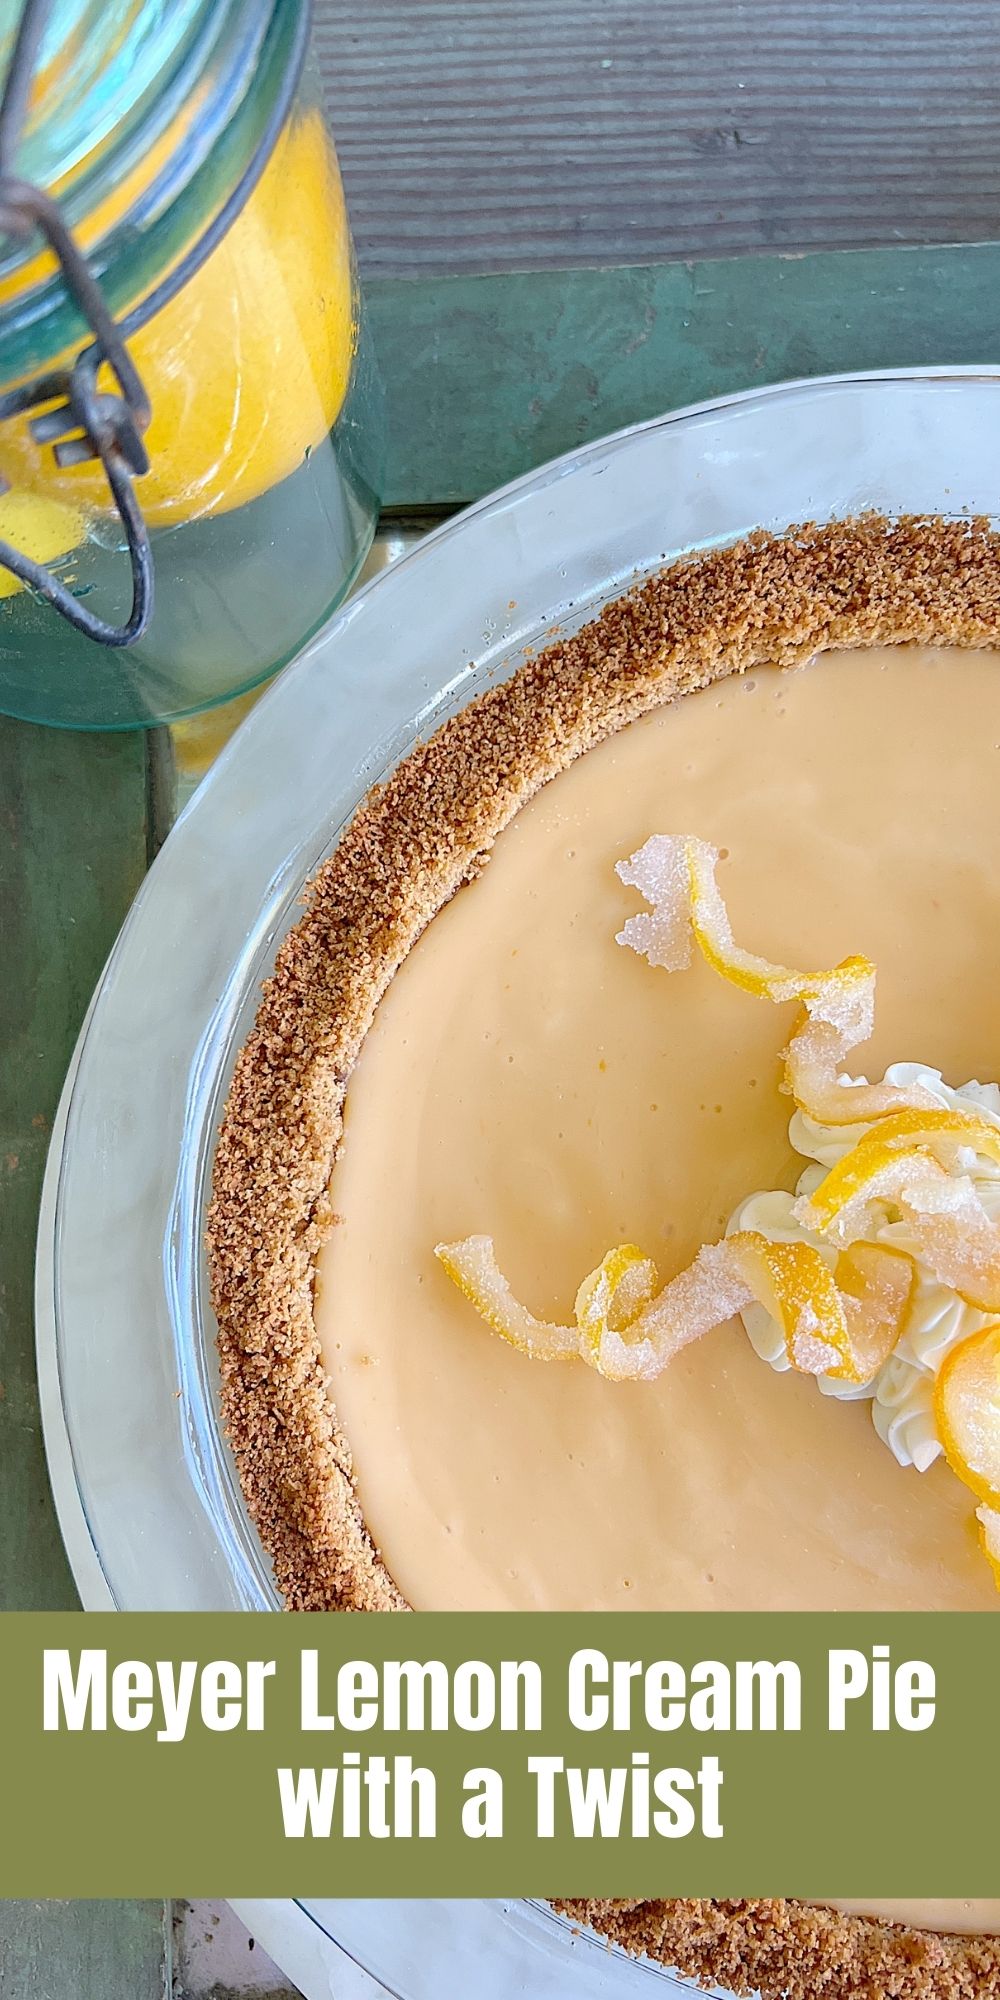 Today is Pi Day, and I made a Meyer Lemon Cream Pie to celebrate the day. This recipe is delicious and easy to make for Pi Day or any day.